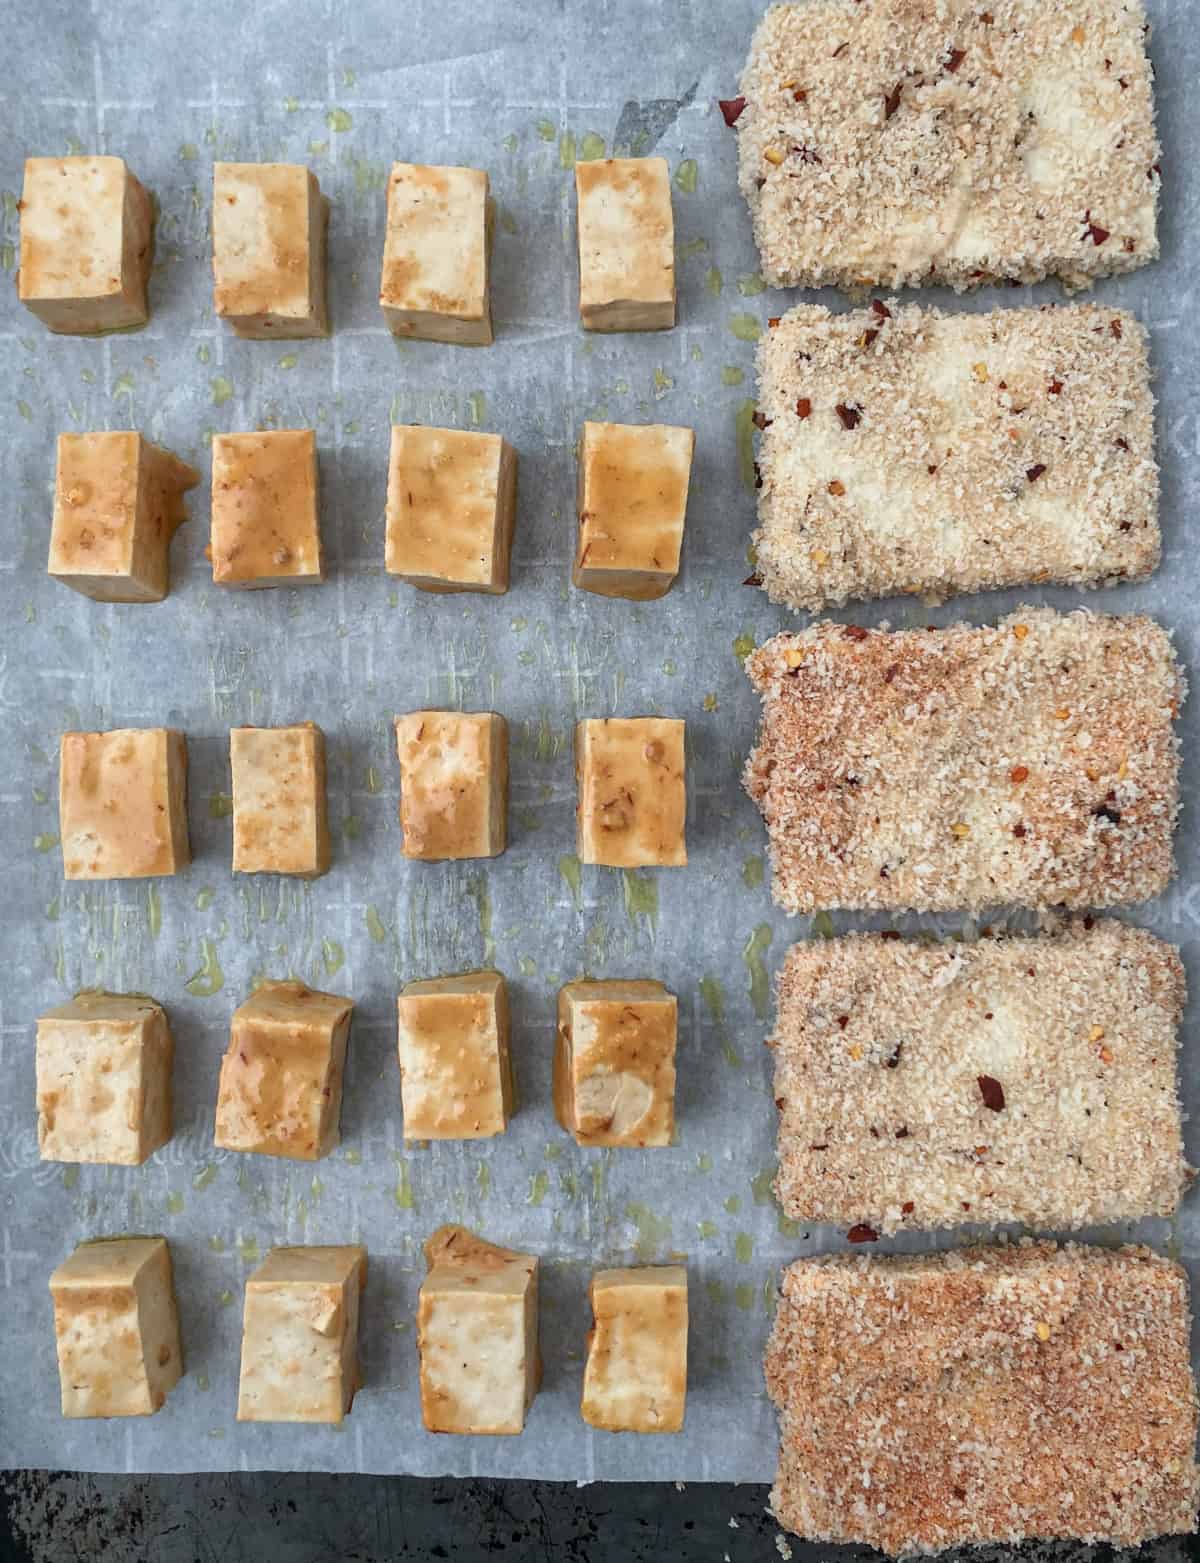 Tofu cubes and slabs on a baking sheet.